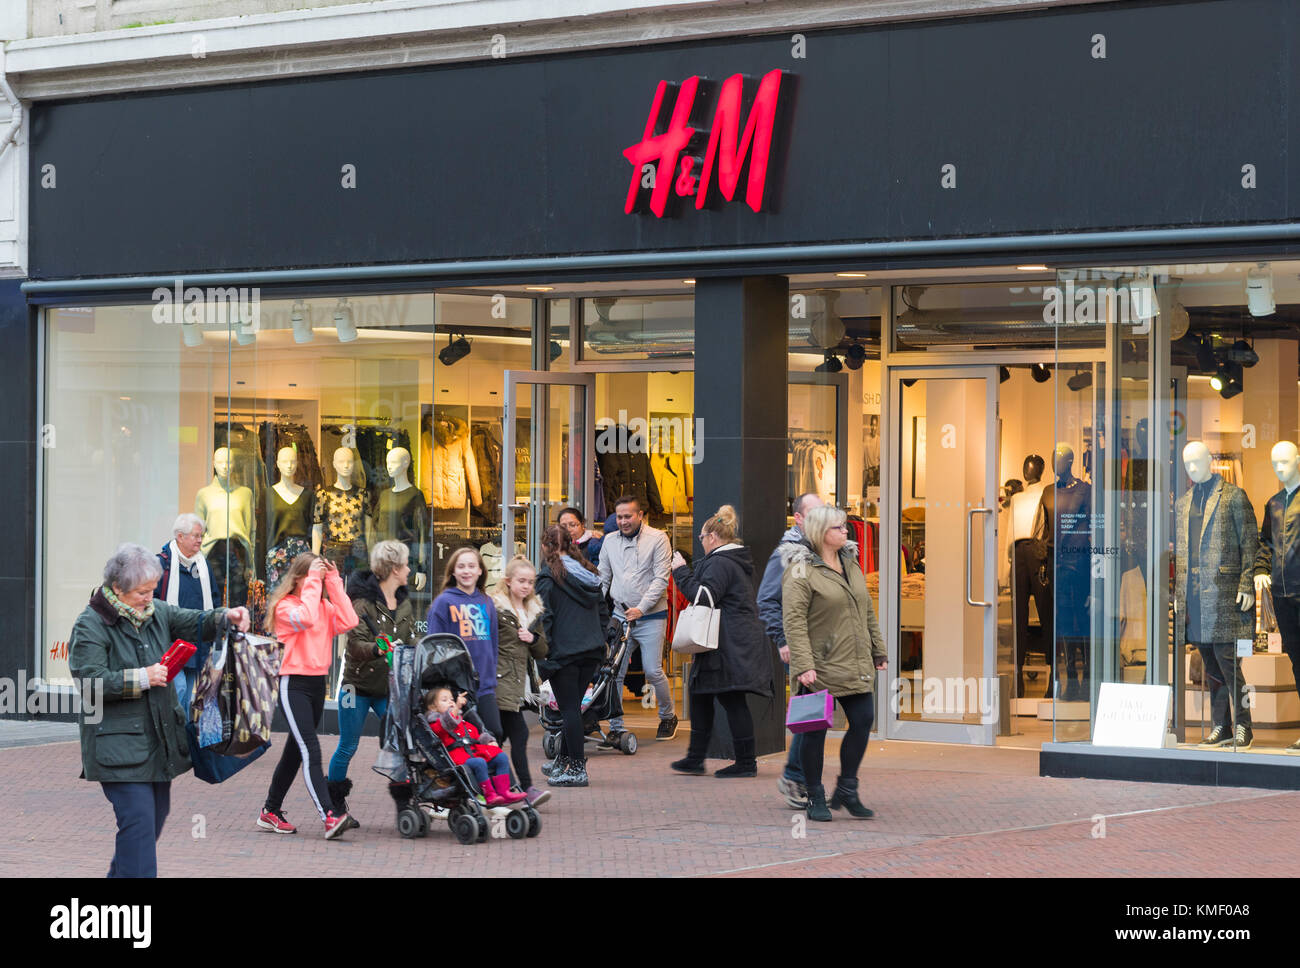 H&M shop front entrance in the UK. Retail store. Stock Photo